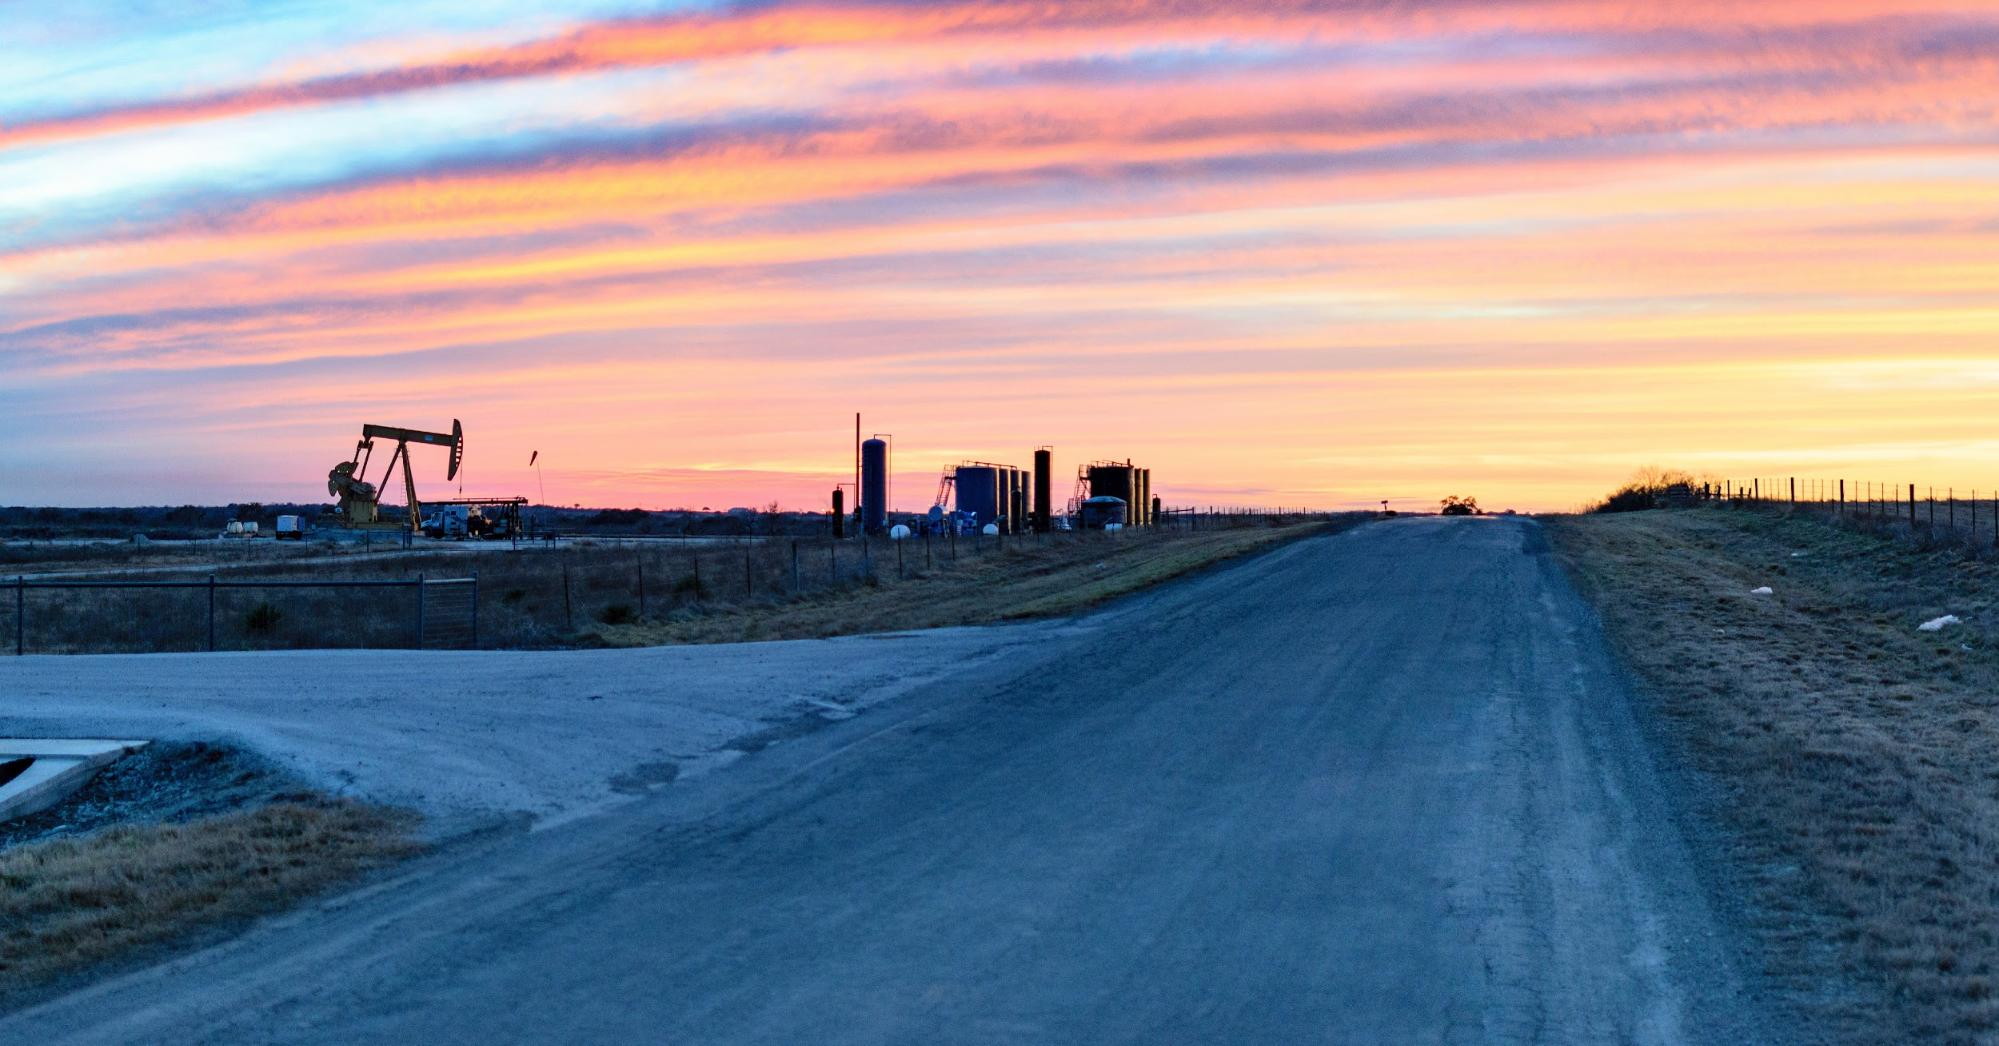 sunset over oil field in the permian basin